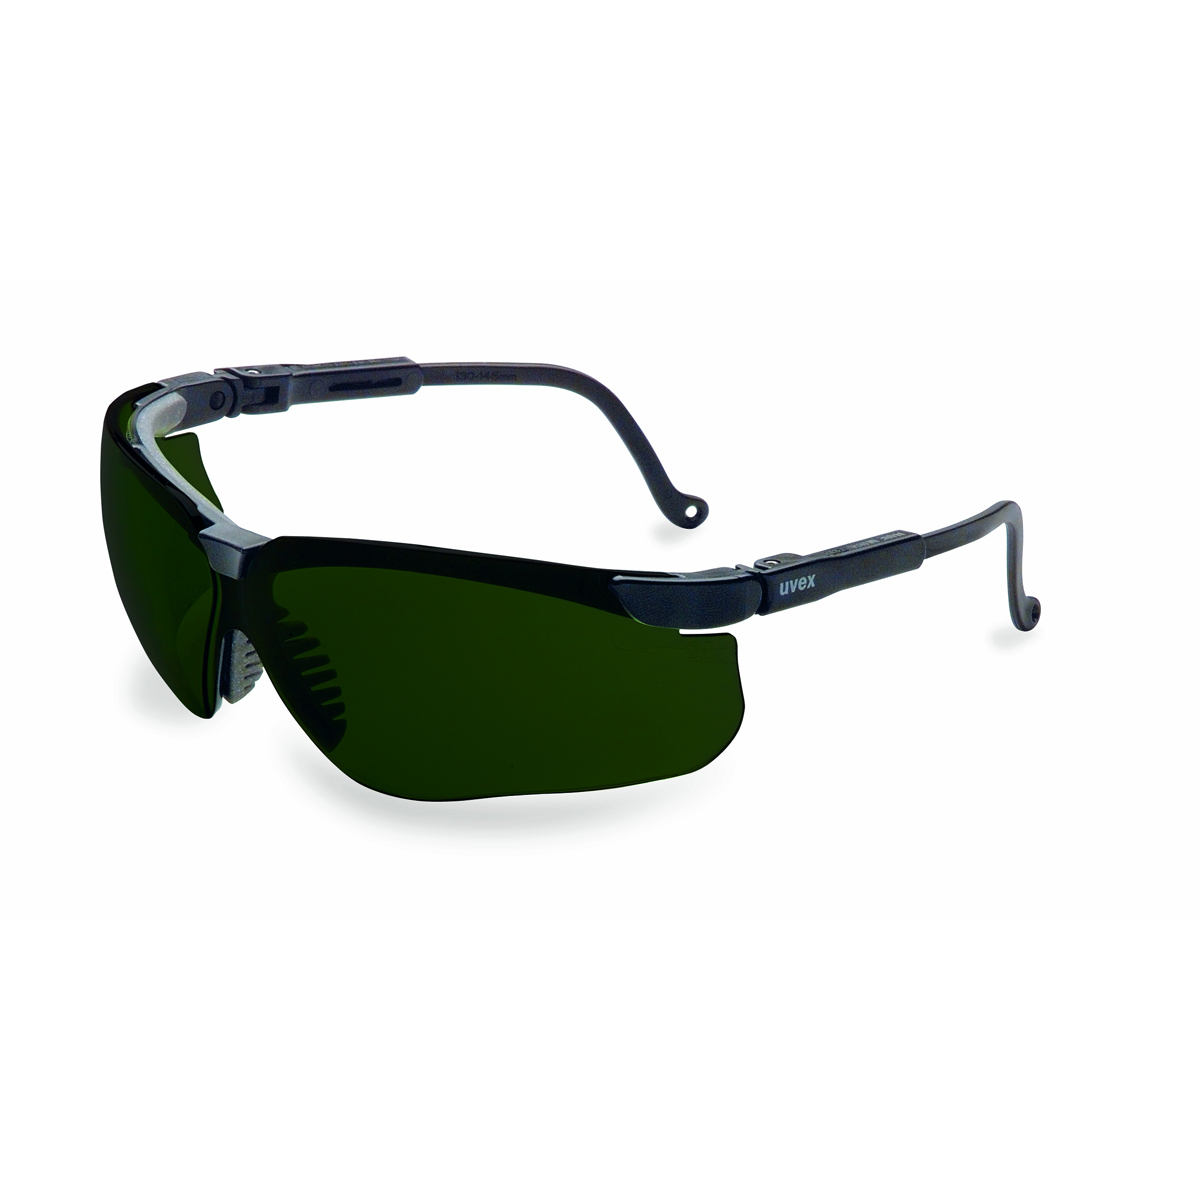 Honeywell Uvex Genesis® Black Safety Glasses With Shade 5.0 Anti-Fog Lens (Availability restrictions apply.)